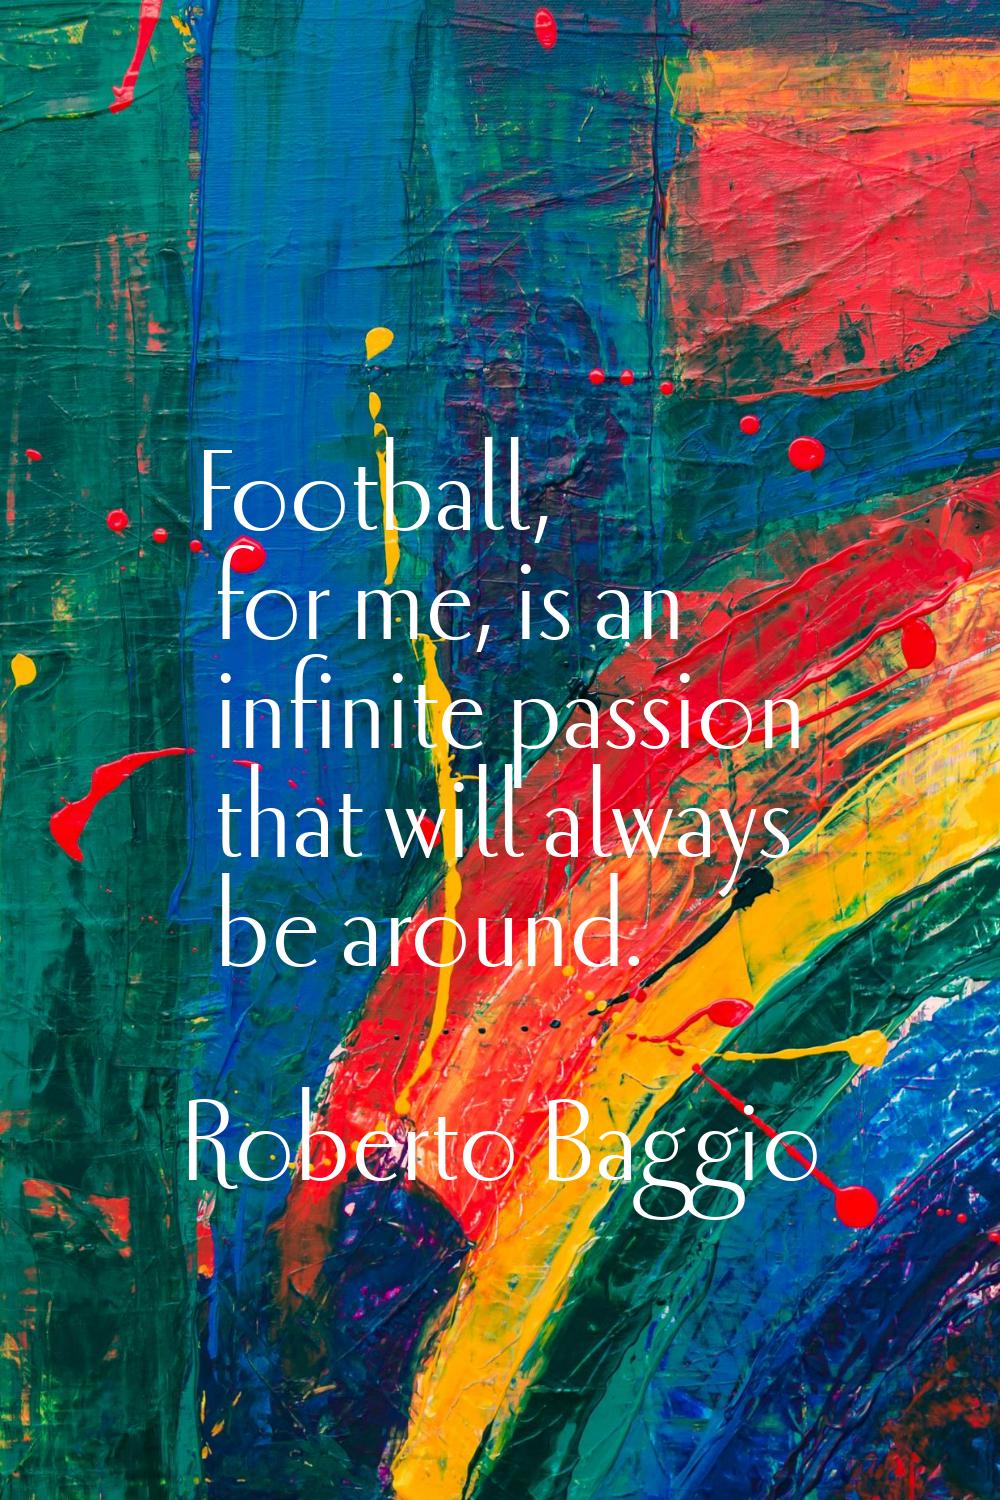 Football, for me, is an infinite passion that will always be around.